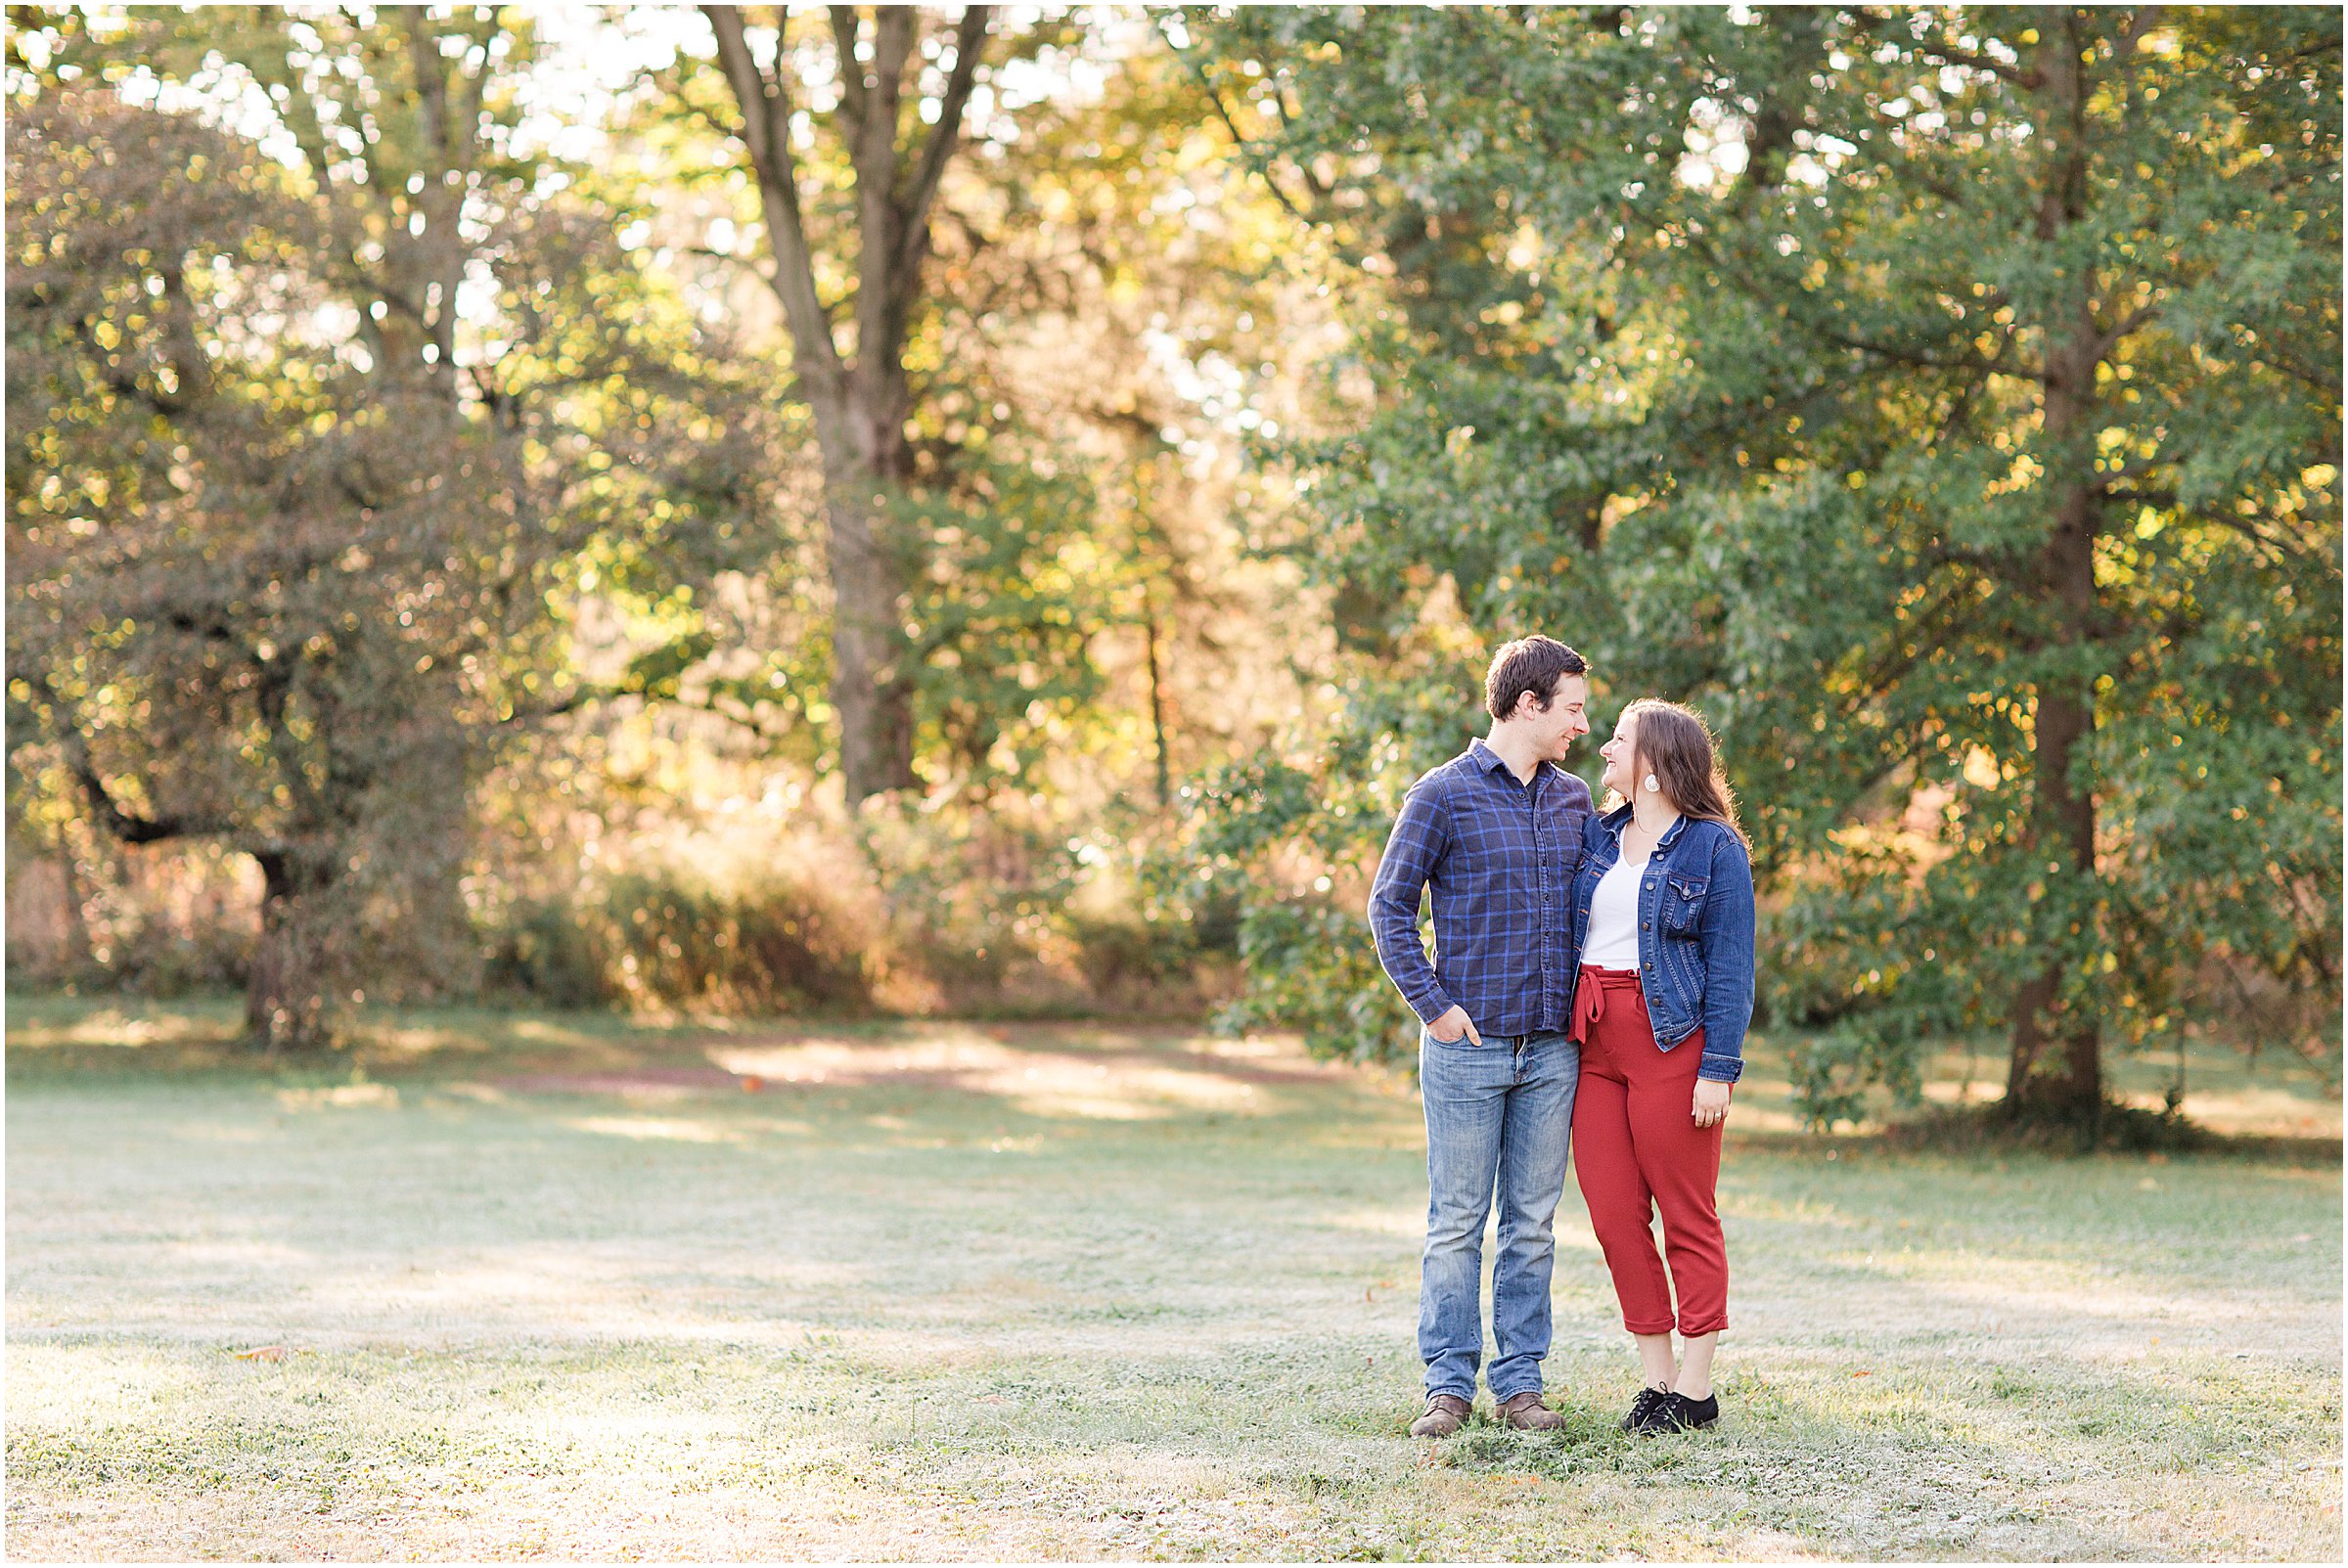 Holliday Park Engagement Session by Sami Renee_0008.jpg